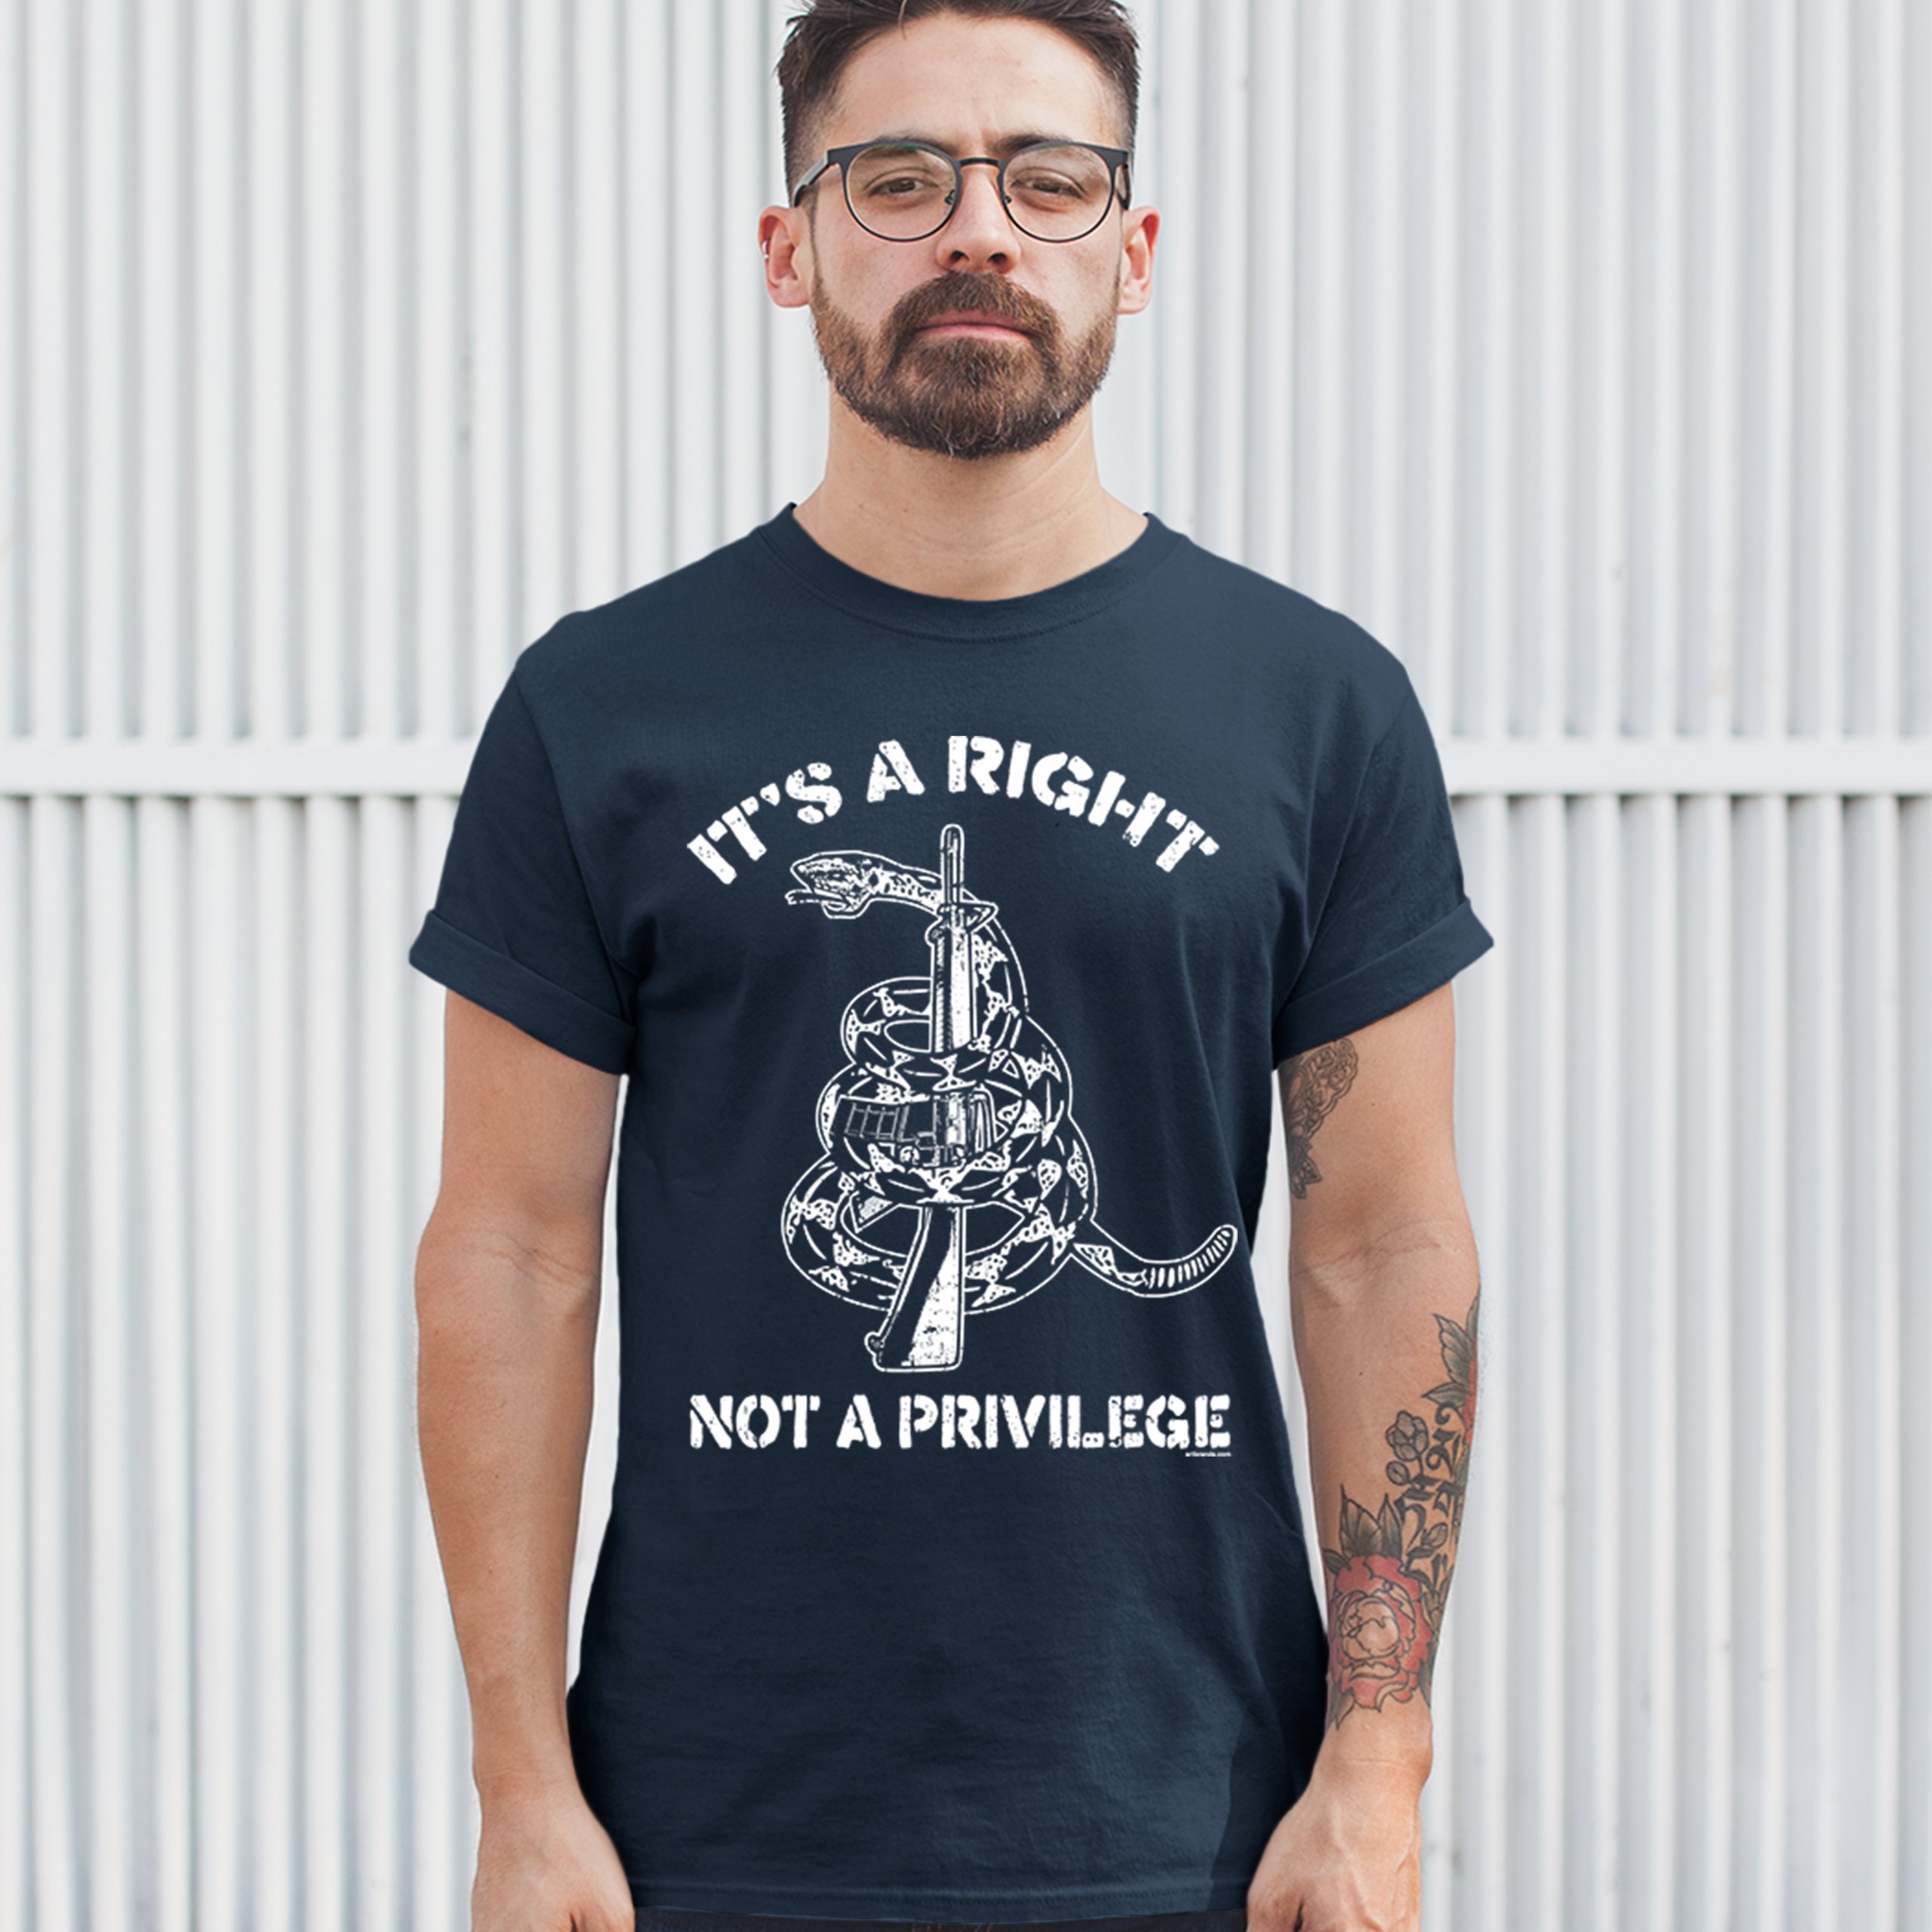 It's a Right not a Privilege T-shirt Don't Tread on Me Gadsden 2A Men's ...